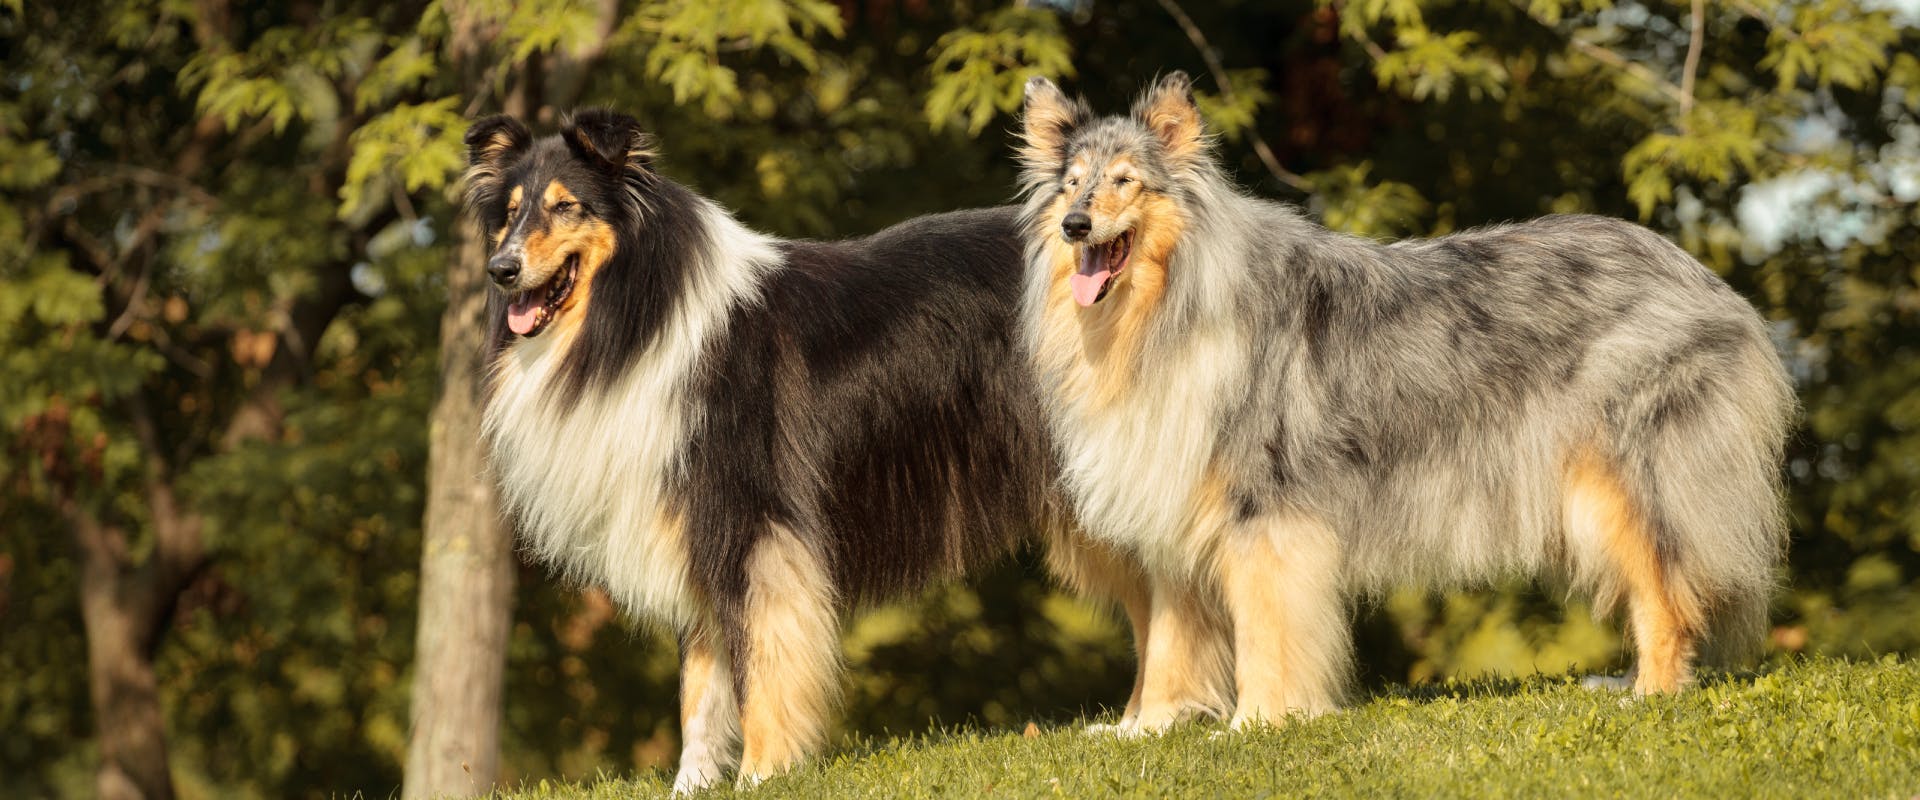 What Is A Rough Collie?, Lassie Dog Breed